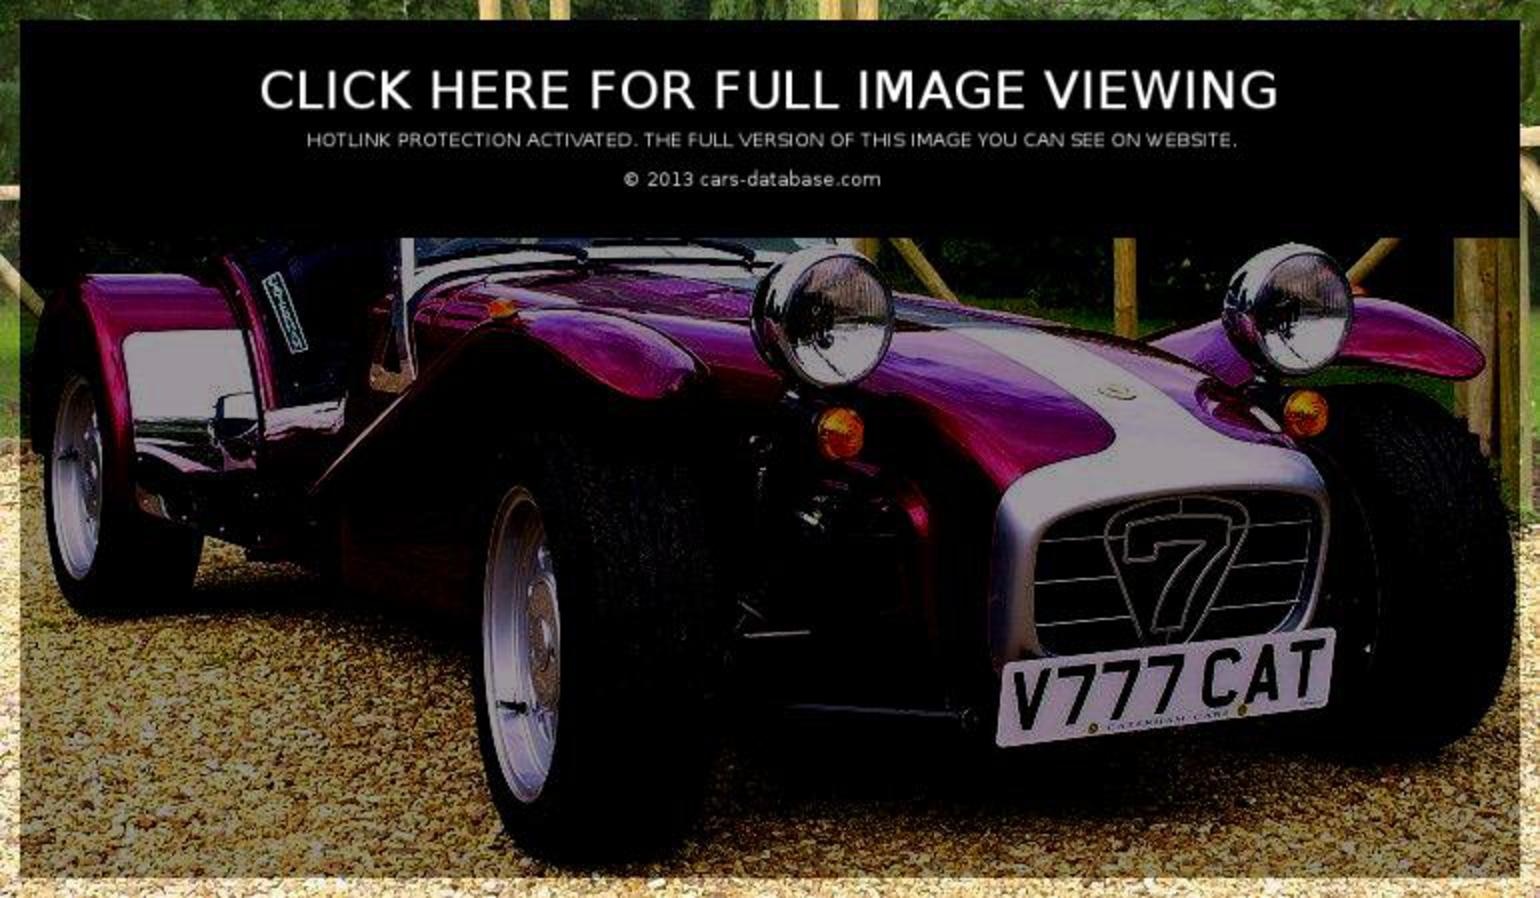 Caterham: Interesting facts and history of Caterham, full models ...